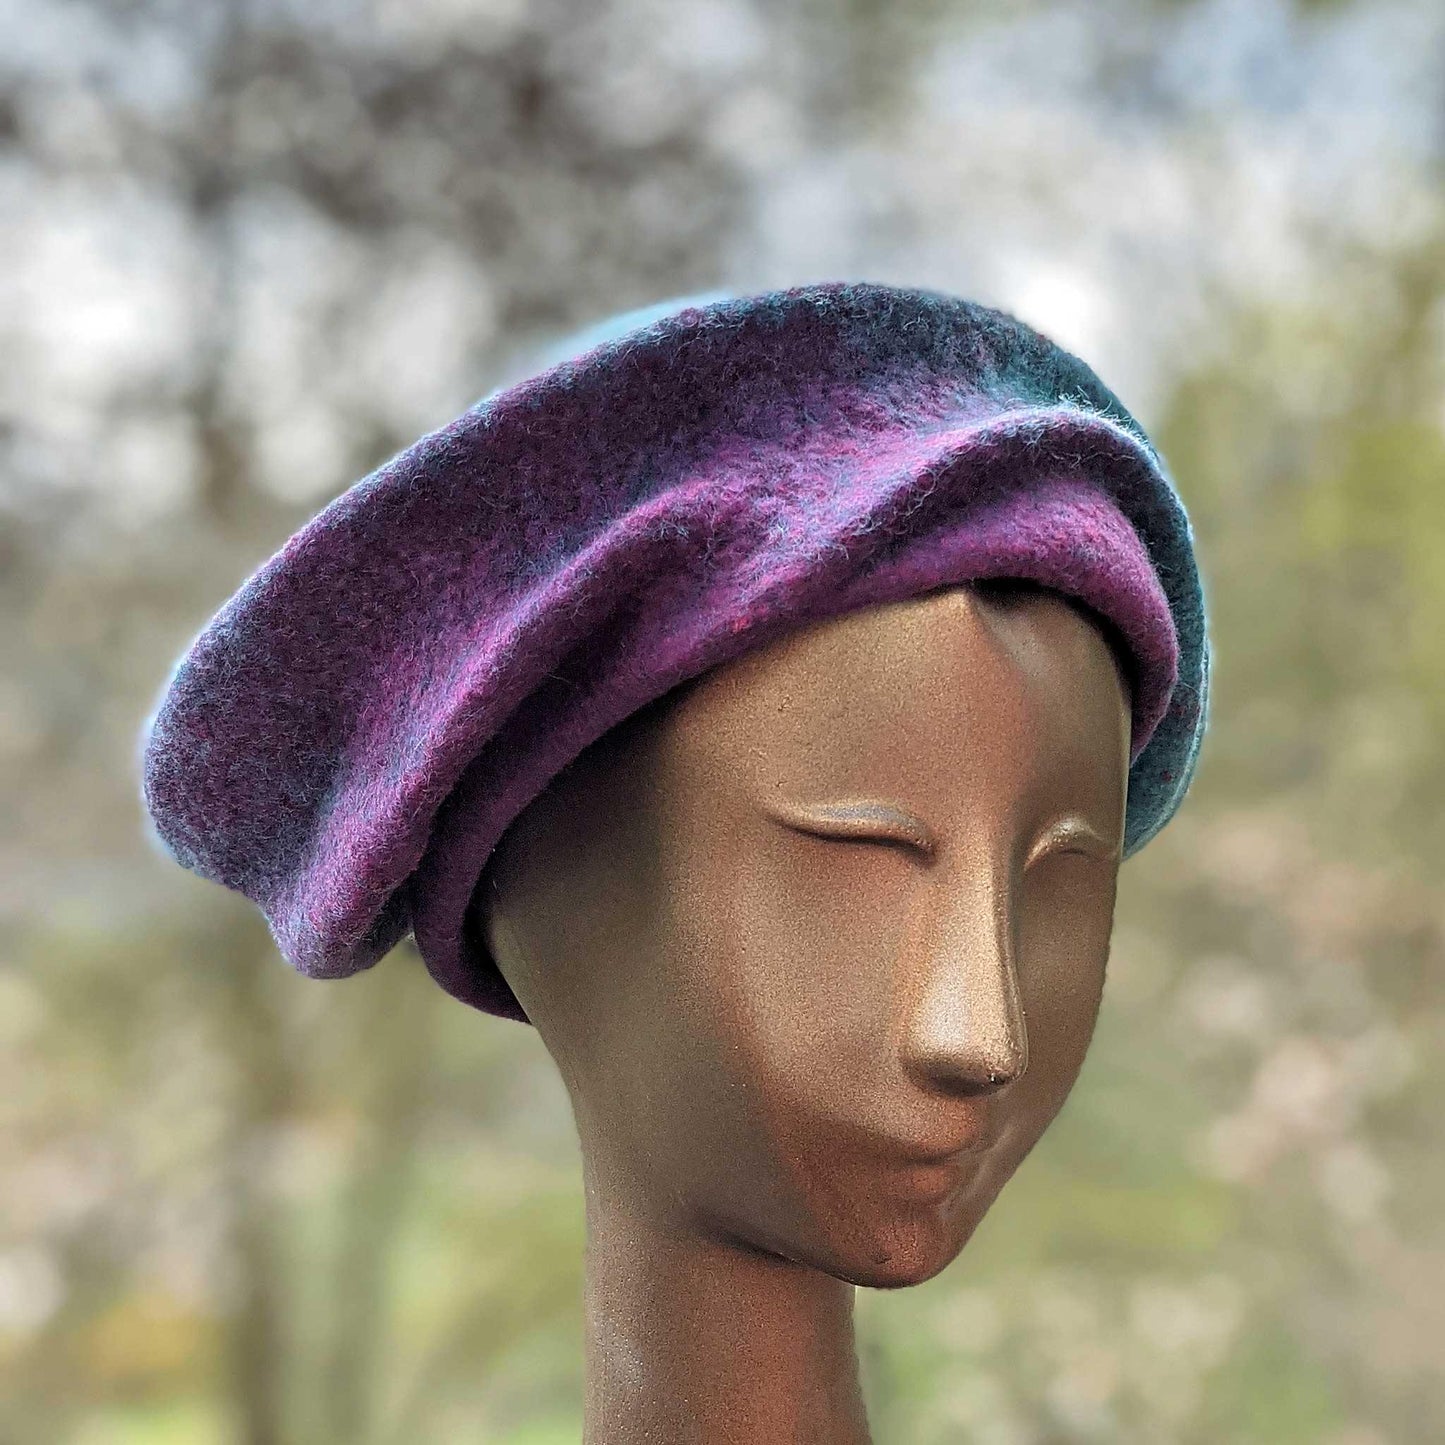 Undulating Spiral Hat in Blue-Green and Raspberry - threequarters view